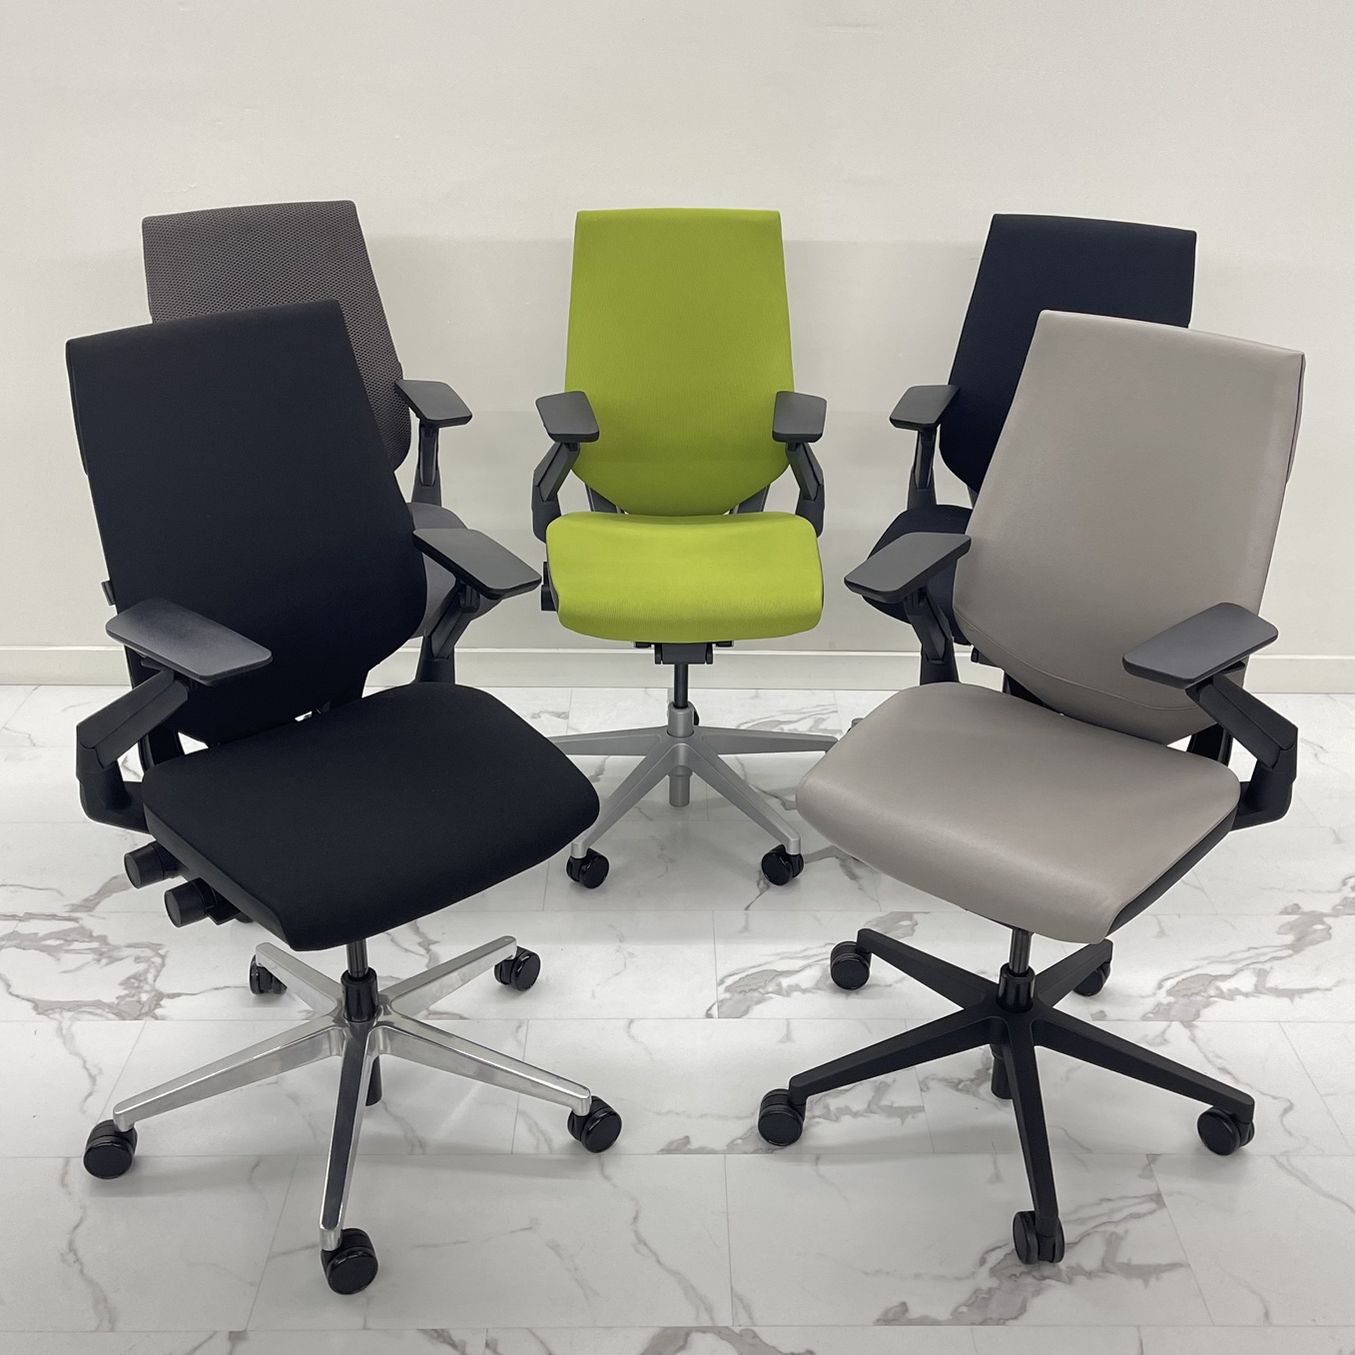 IN LIKE NEW CONDITION STEELCASE GESTURE CHAIRS STARTING AT $650